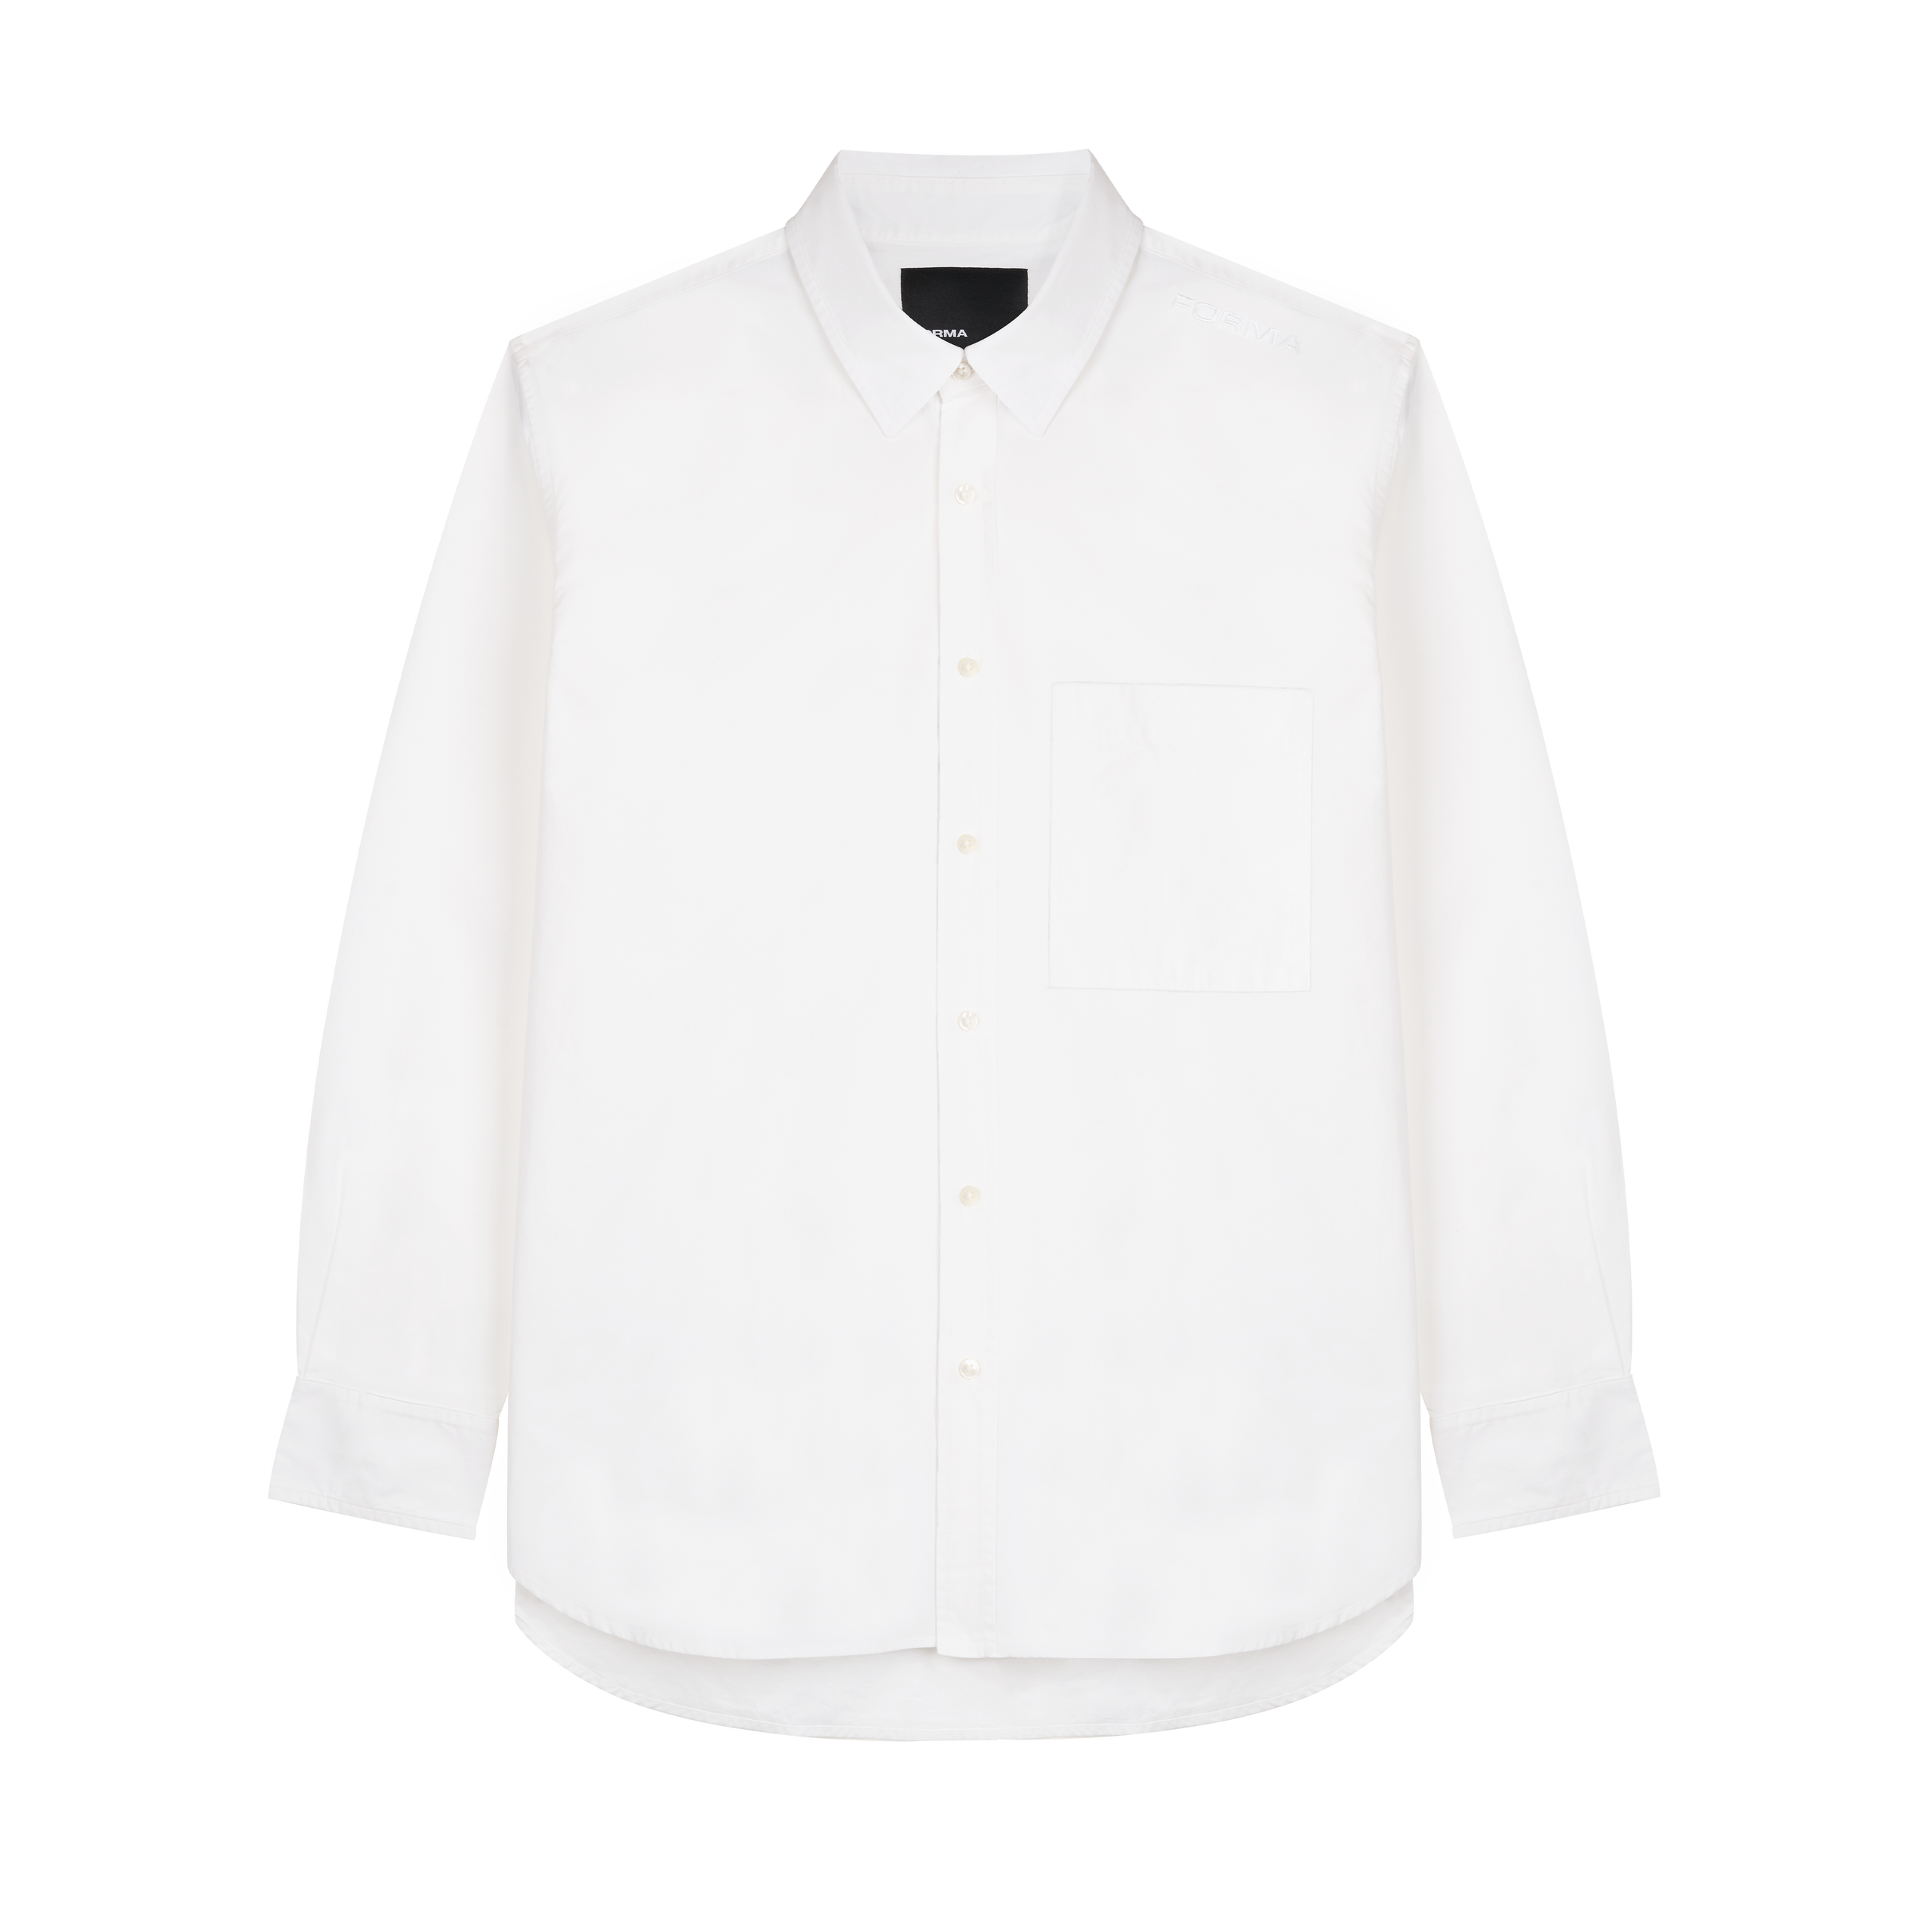 Forma classic button up shirt